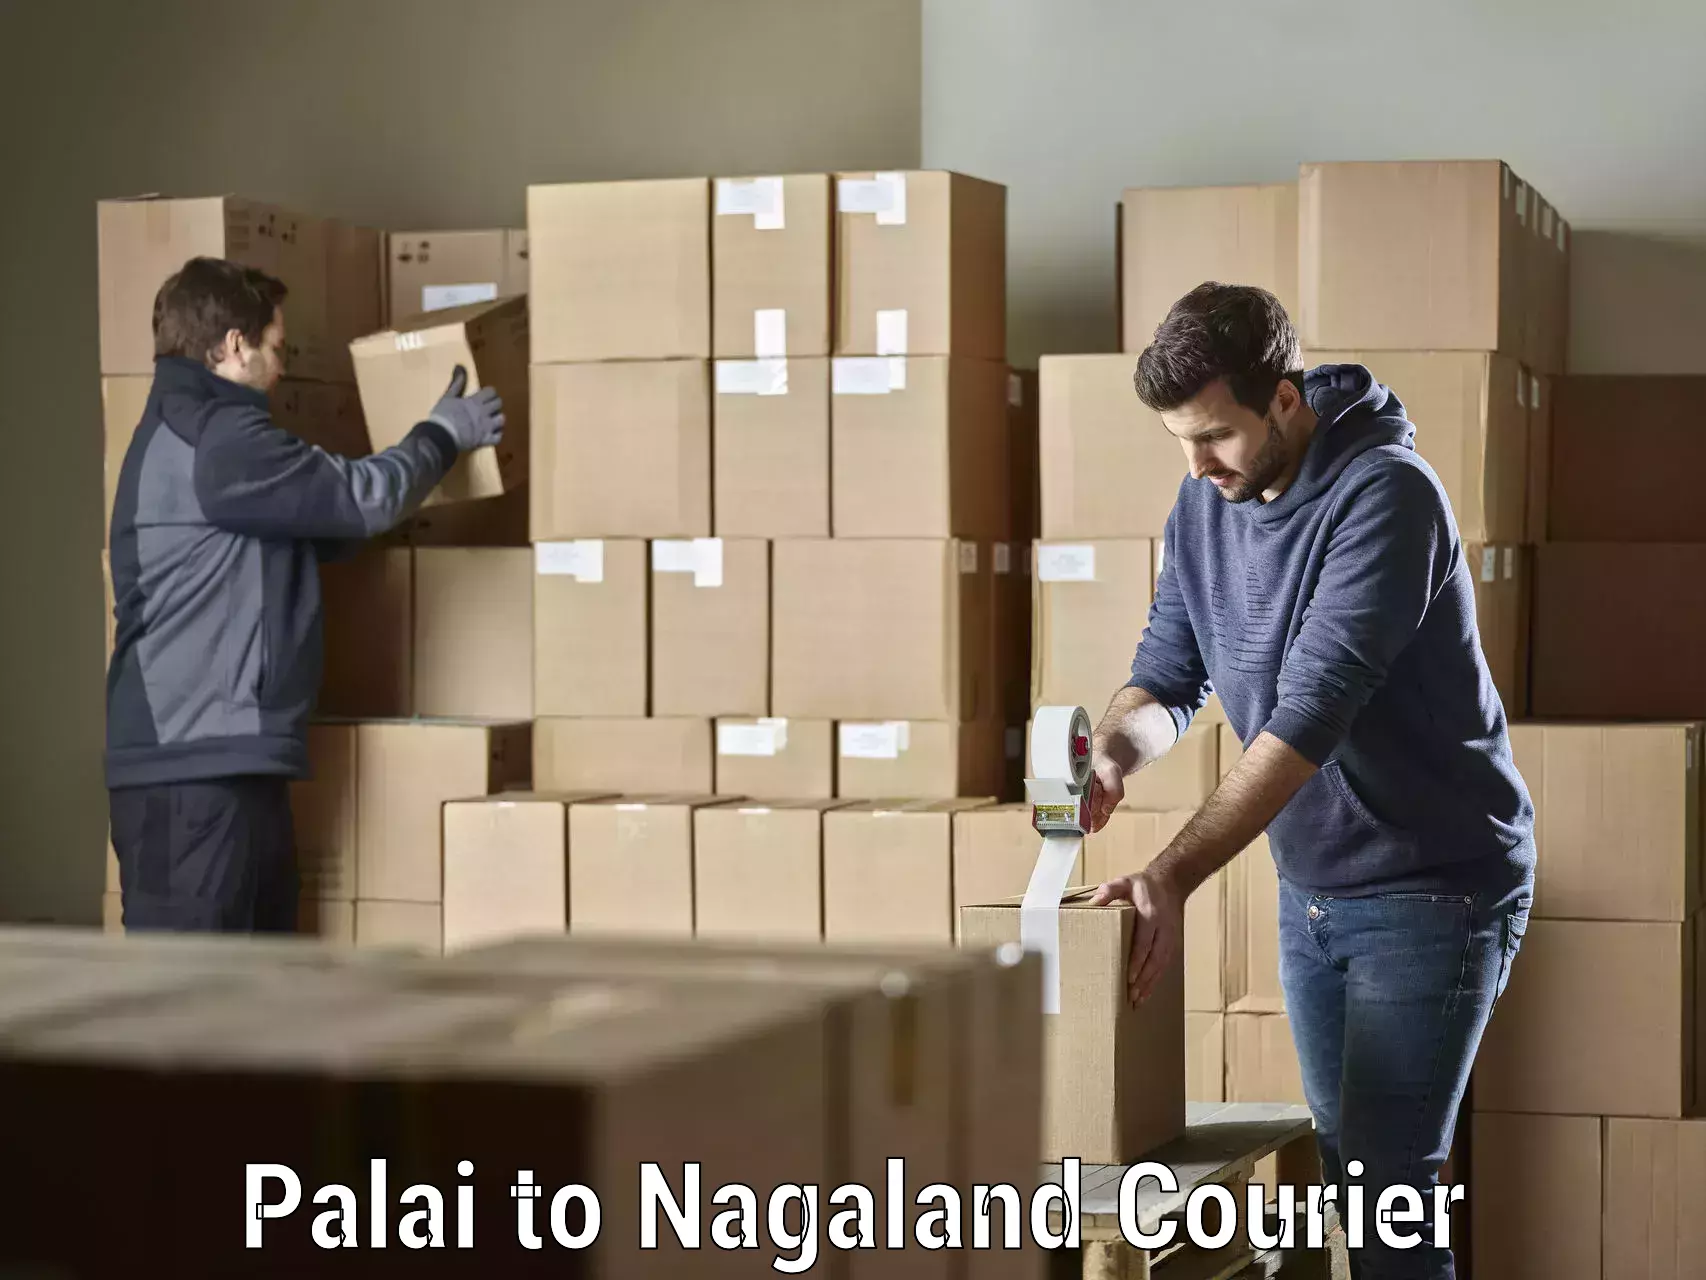 Local delivery service Palai to Nagaland